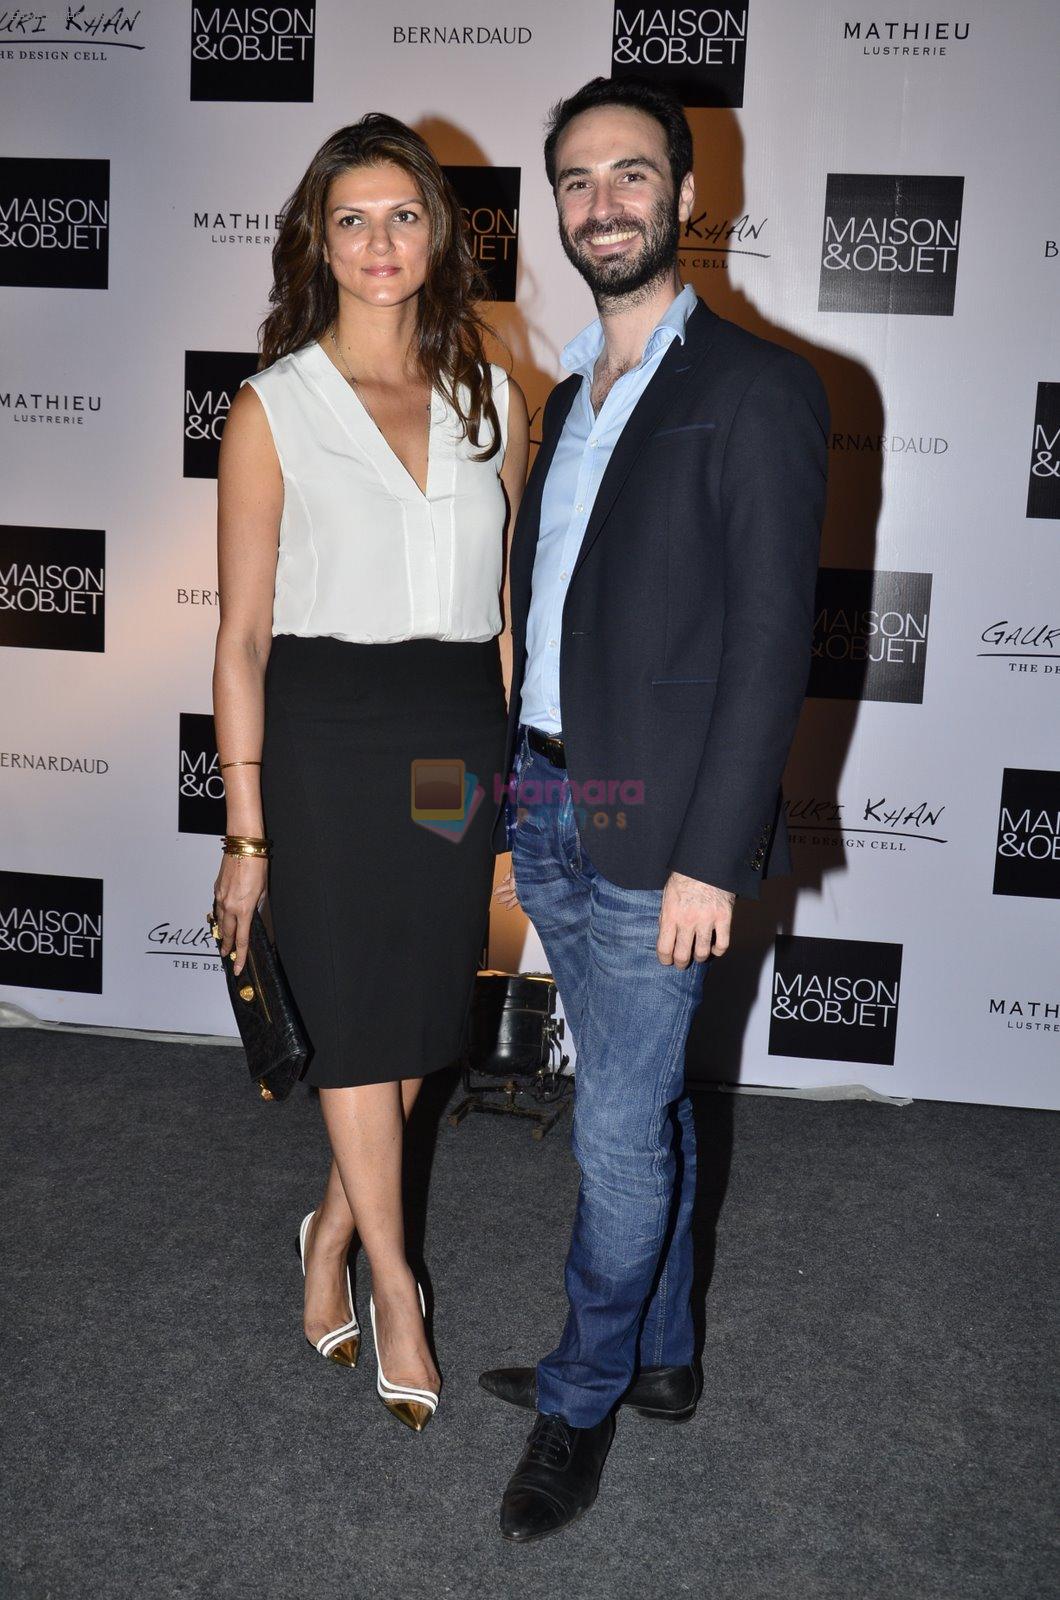 Nandita Mahtani at Gauri Khan's The Design Cell and Maison & Objet cocktail evening in Lower Parel, Mumbai on 11th Nov 2014